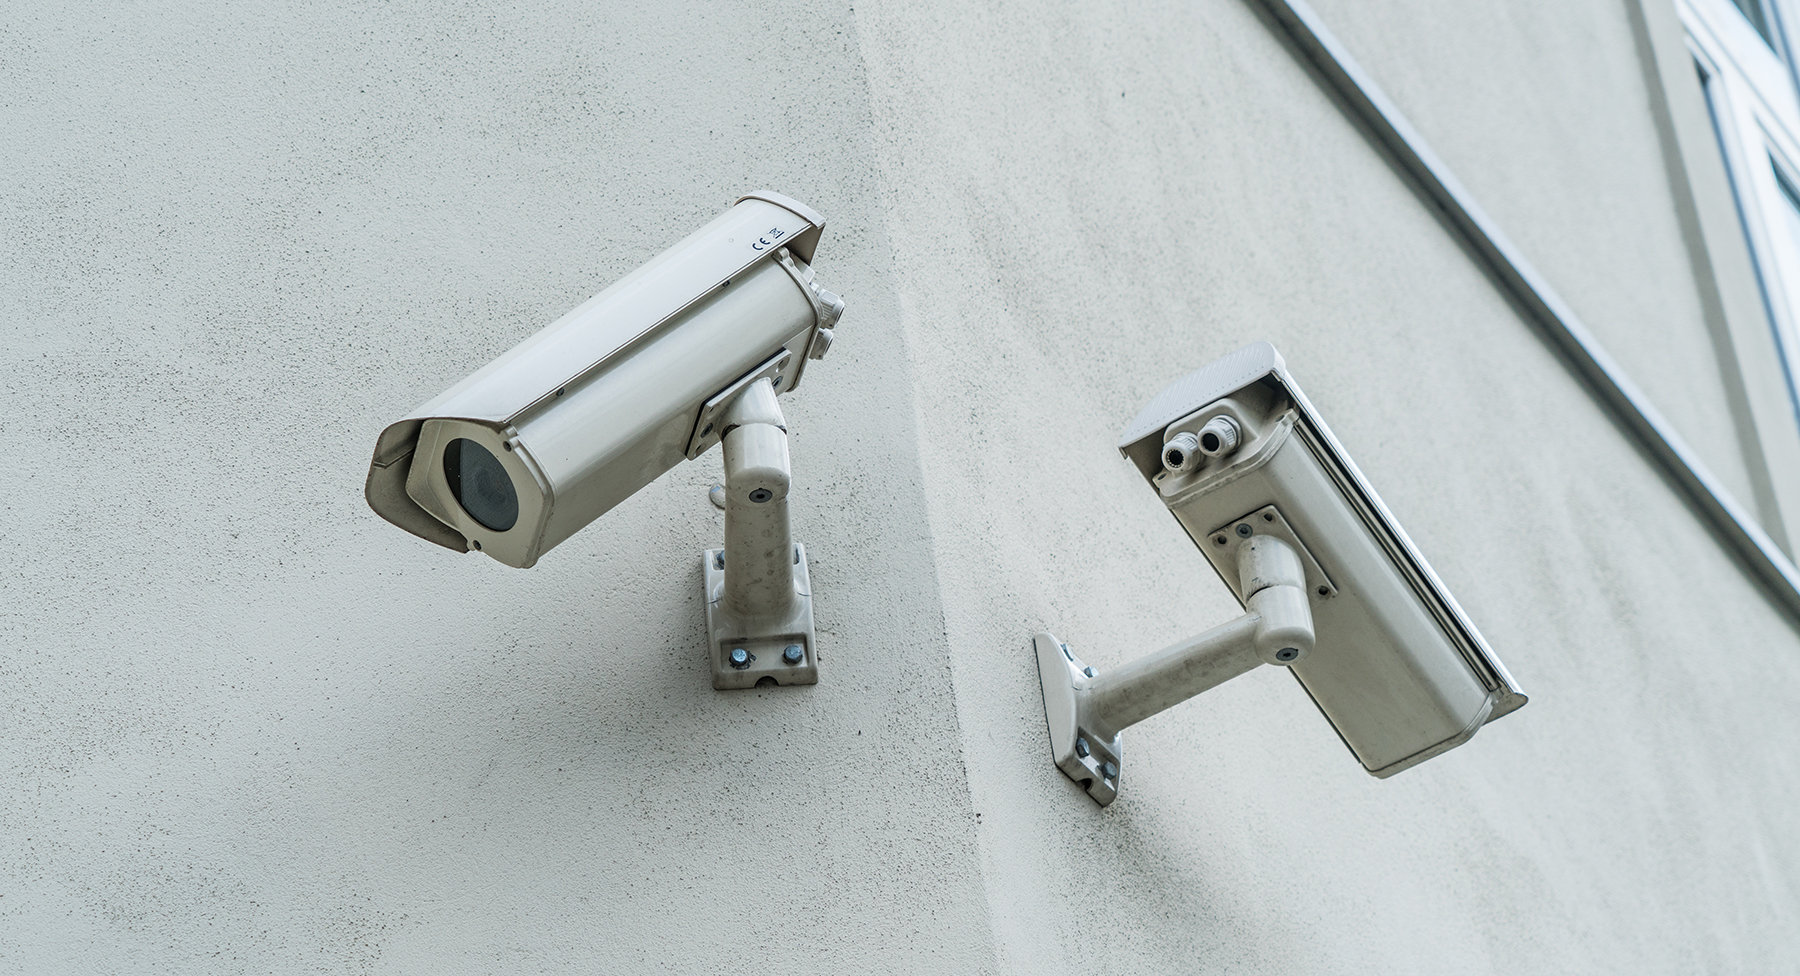 Two CCTV cameras on a wall